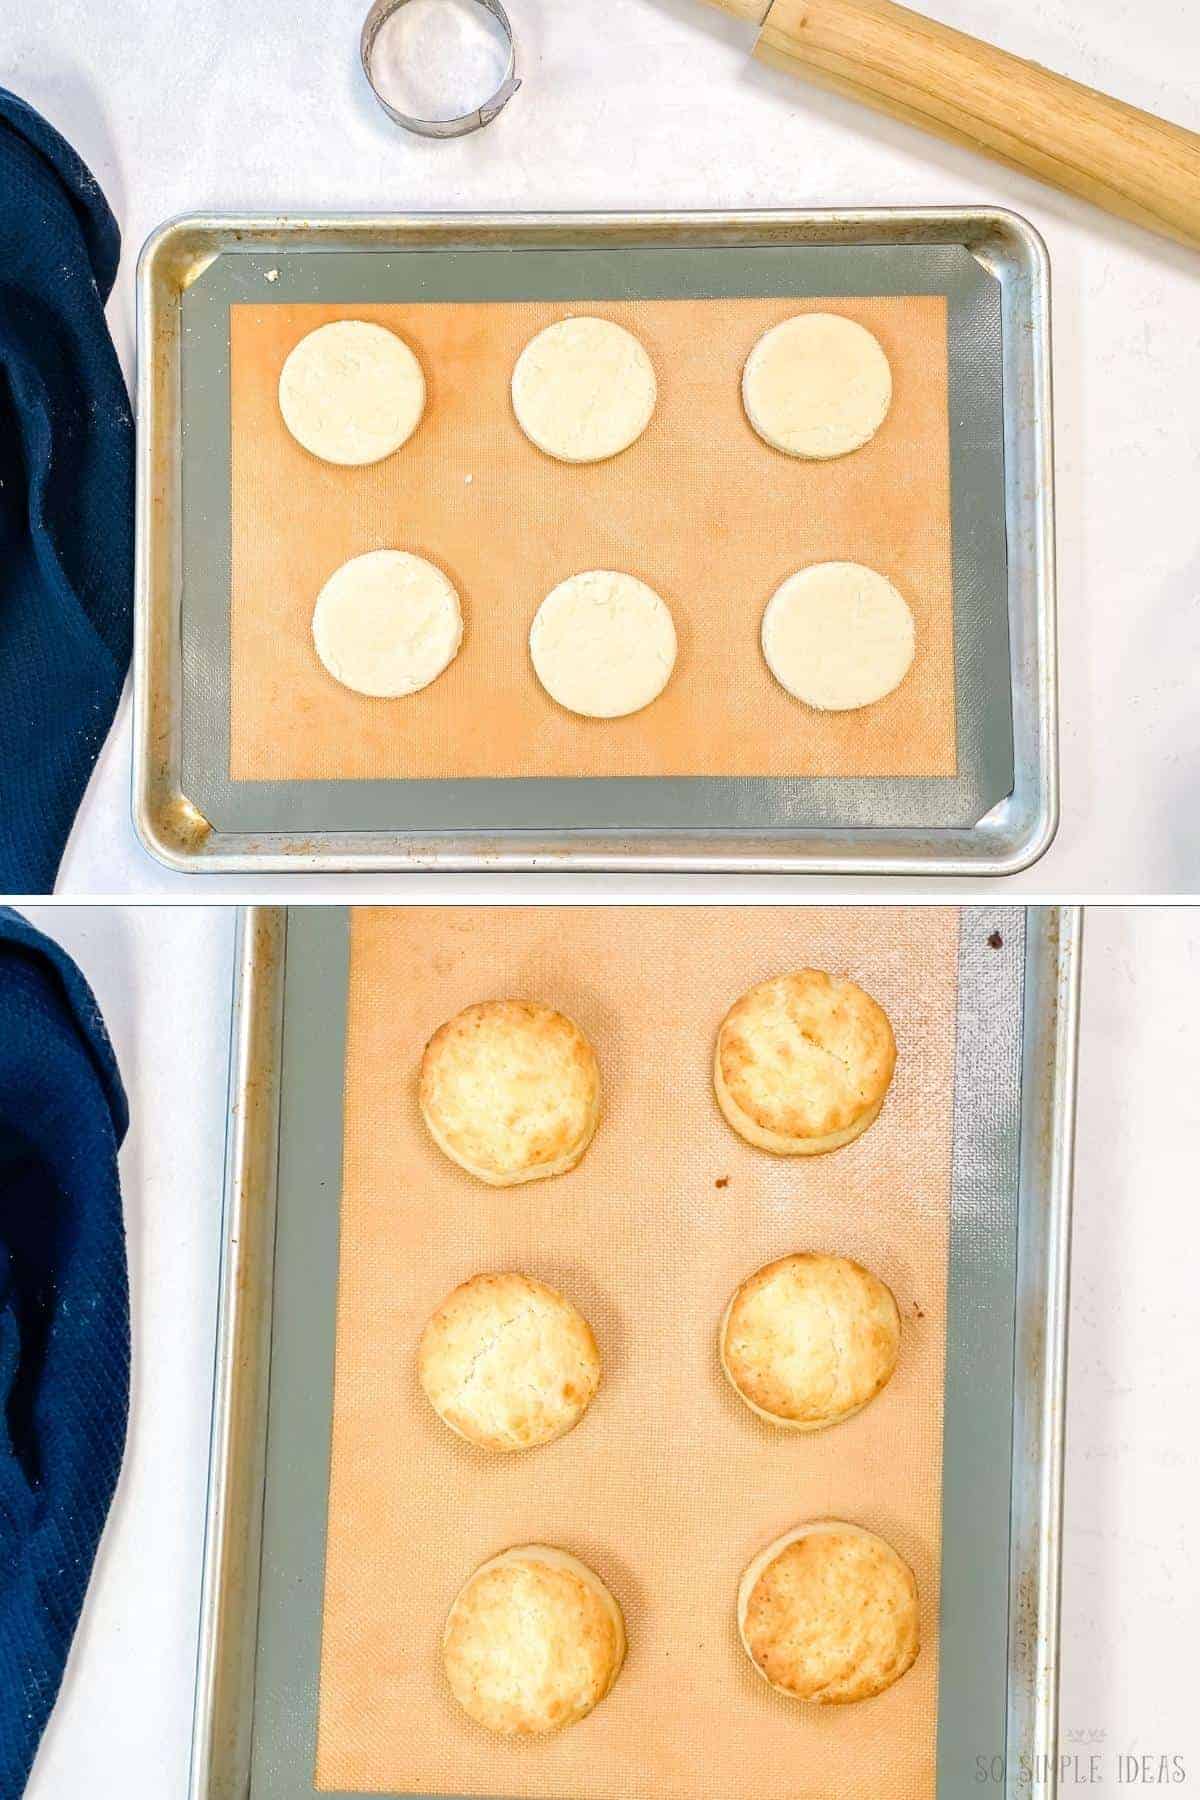 baking the dough into low-carb biscuits.